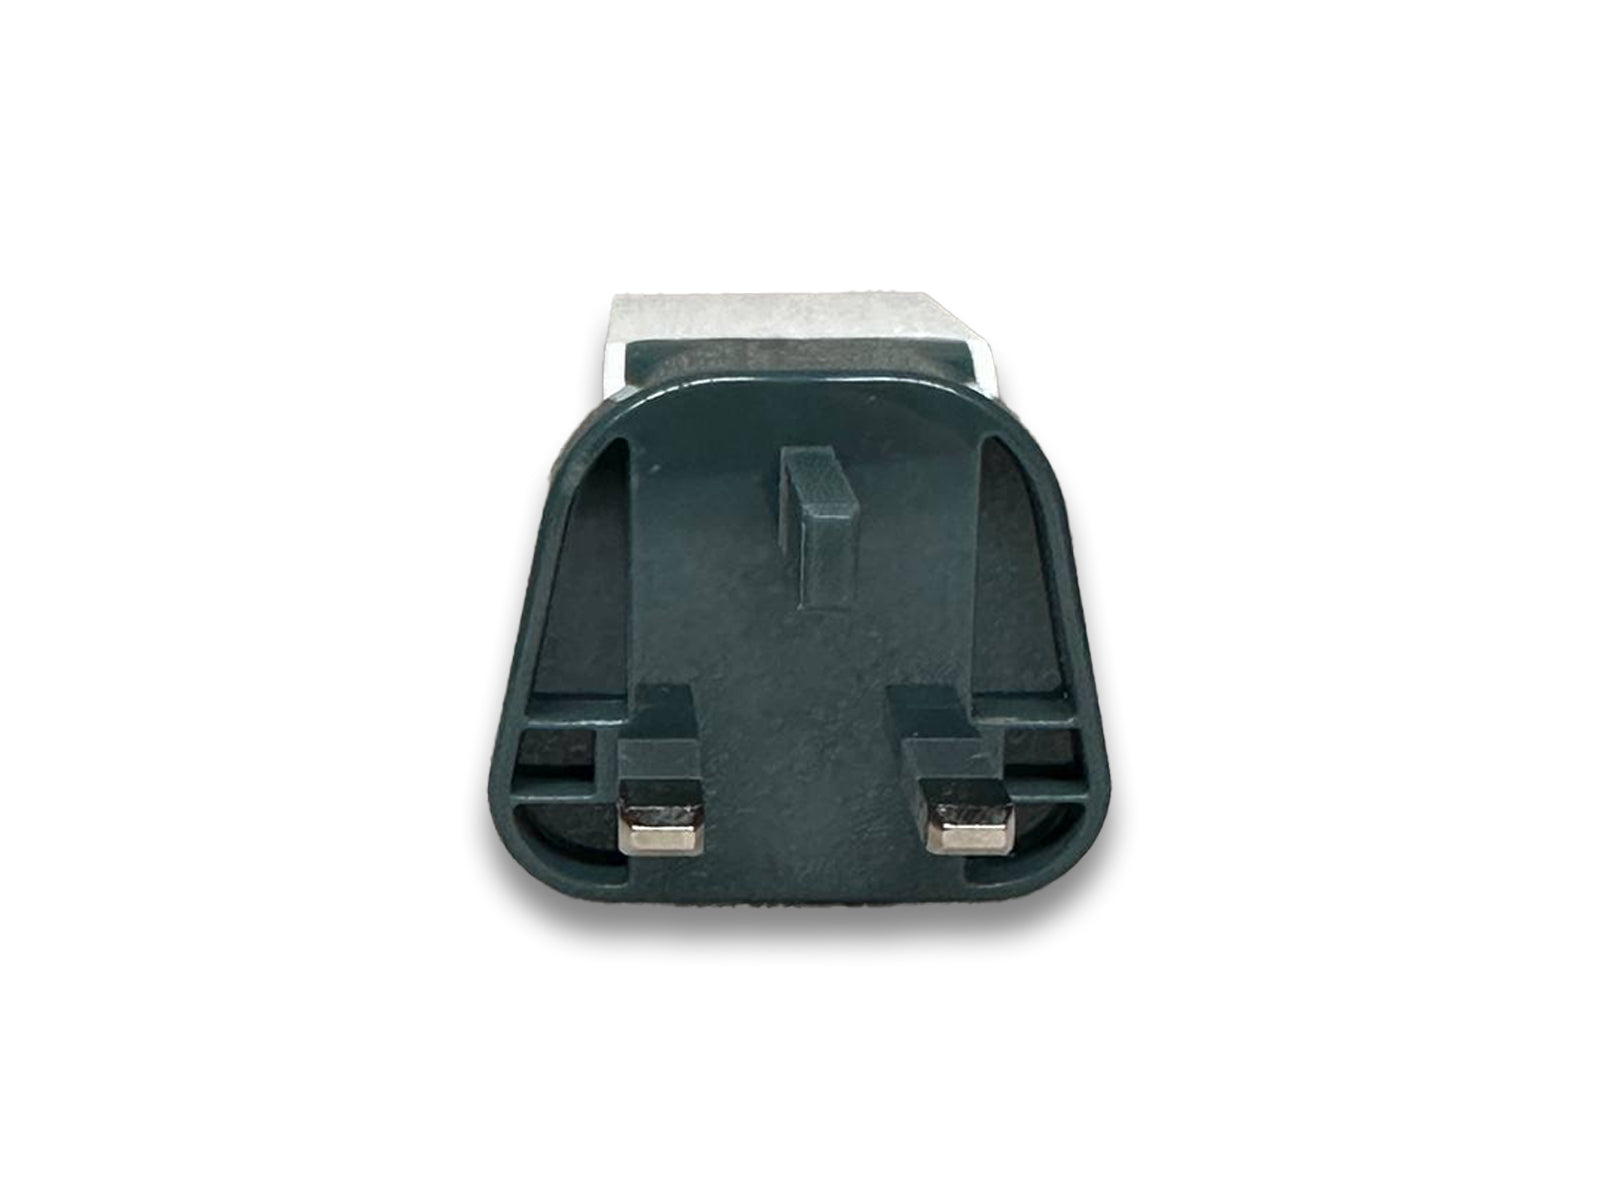 Image shows front prongs view of charger on white background